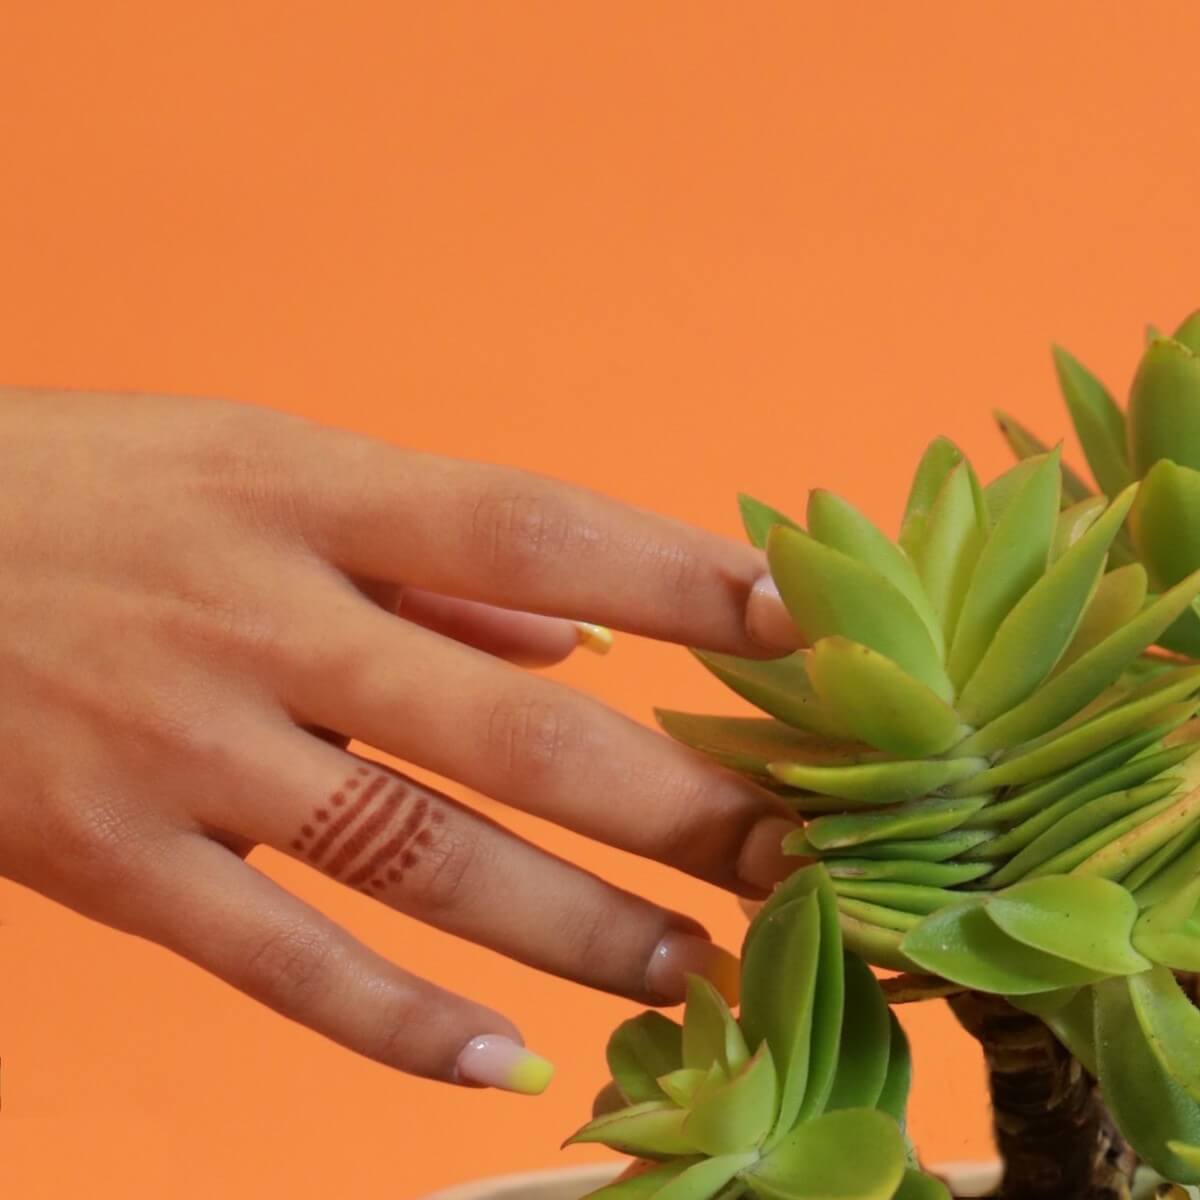 Henna ring jewelry on hand with plant